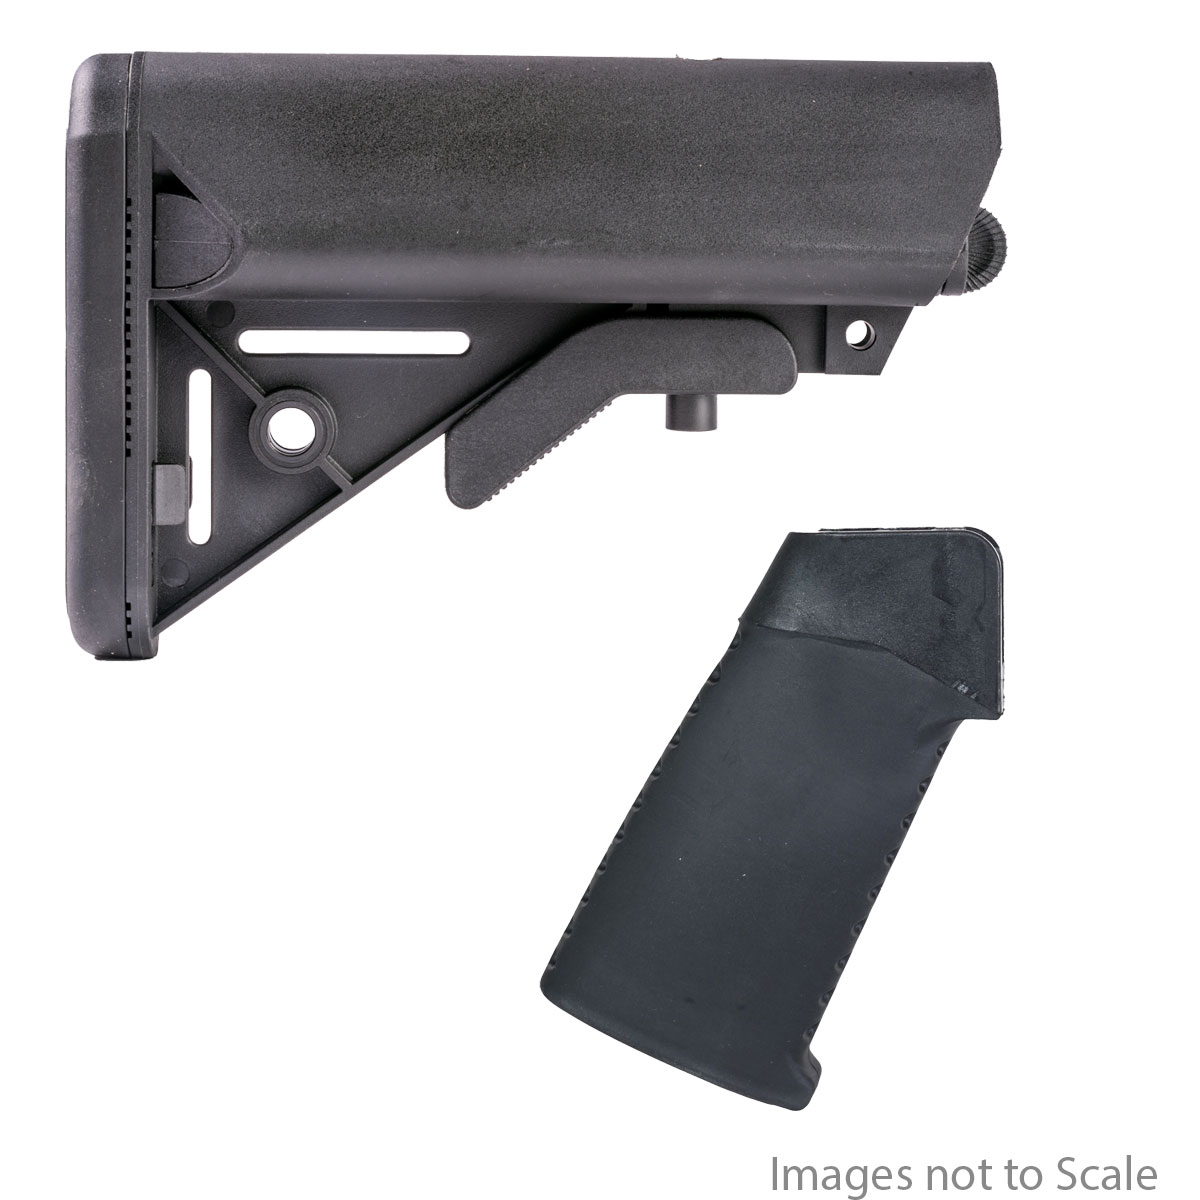 Furniture Upgrade Kit: Team Accessories Corp AR15 Grip Window Grip Straight Top Smooth/Ribbed Black  + Gauntlet Arms SOPMOD Style Collapsible Stock with Storage Compartments